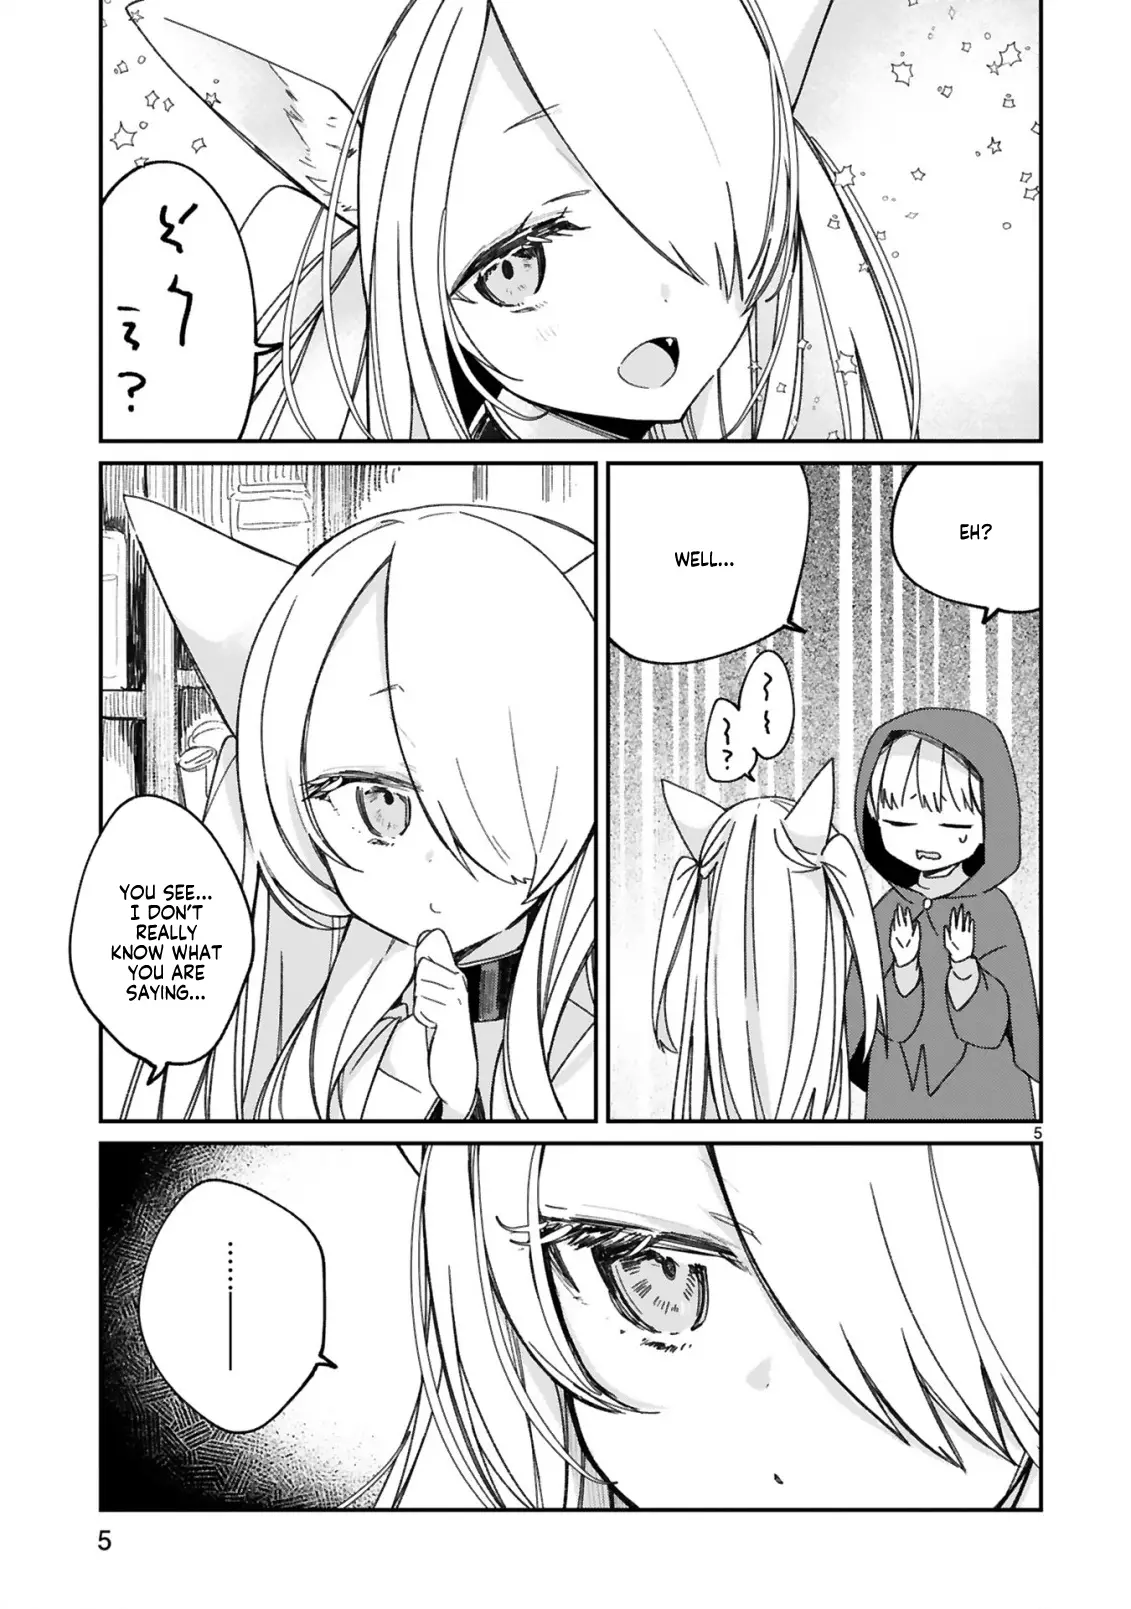 I Was Summoned By The Demon Lord, But I Can't Understand Her Language - 16 page 7